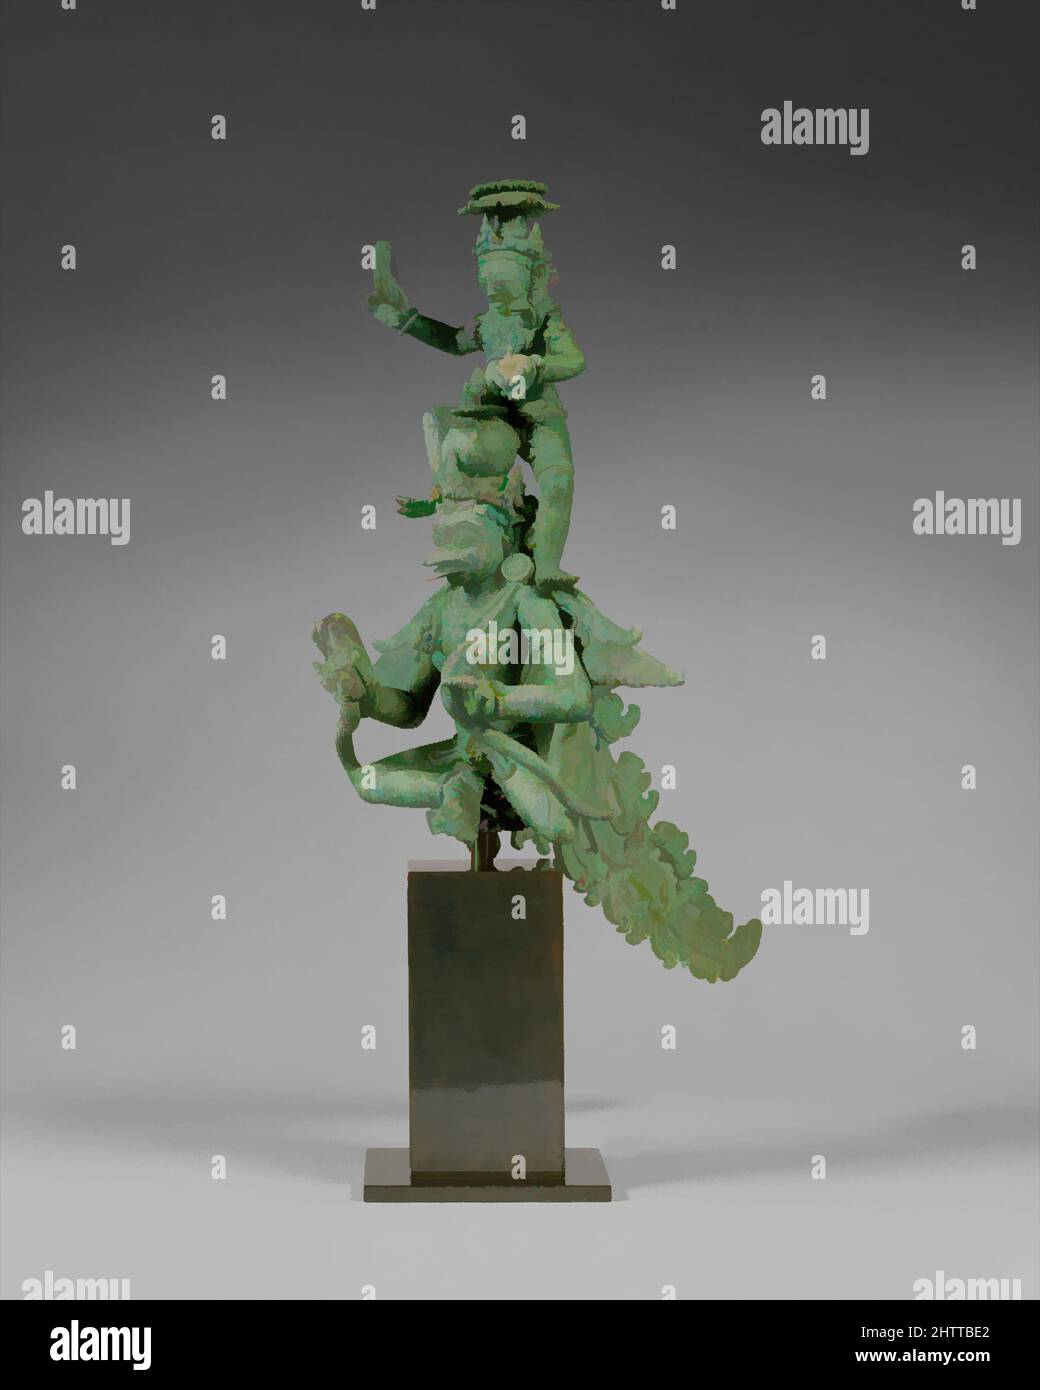 Art inspired by Krishna on Garuda, Central Javanese period, second half of the 9th century, Indonesia (Java), Bronze, H. 15 7/16 in. (39.2 cm), Sculpture, Garuda, the Hindu god who is part man and part bird, symbolizes the power of the sun and is known for slaying evil serpents. In art, Classic works modernized by Artotop with a splash of modernity. Shapes, color and value, eye-catching visual impact on art. Emotions through freedom of artworks in a contemporary way. A timeless message pursuing a wildly creative new direction. Artists turning to the digital medium and creating the Artotop NFT Stock Photo